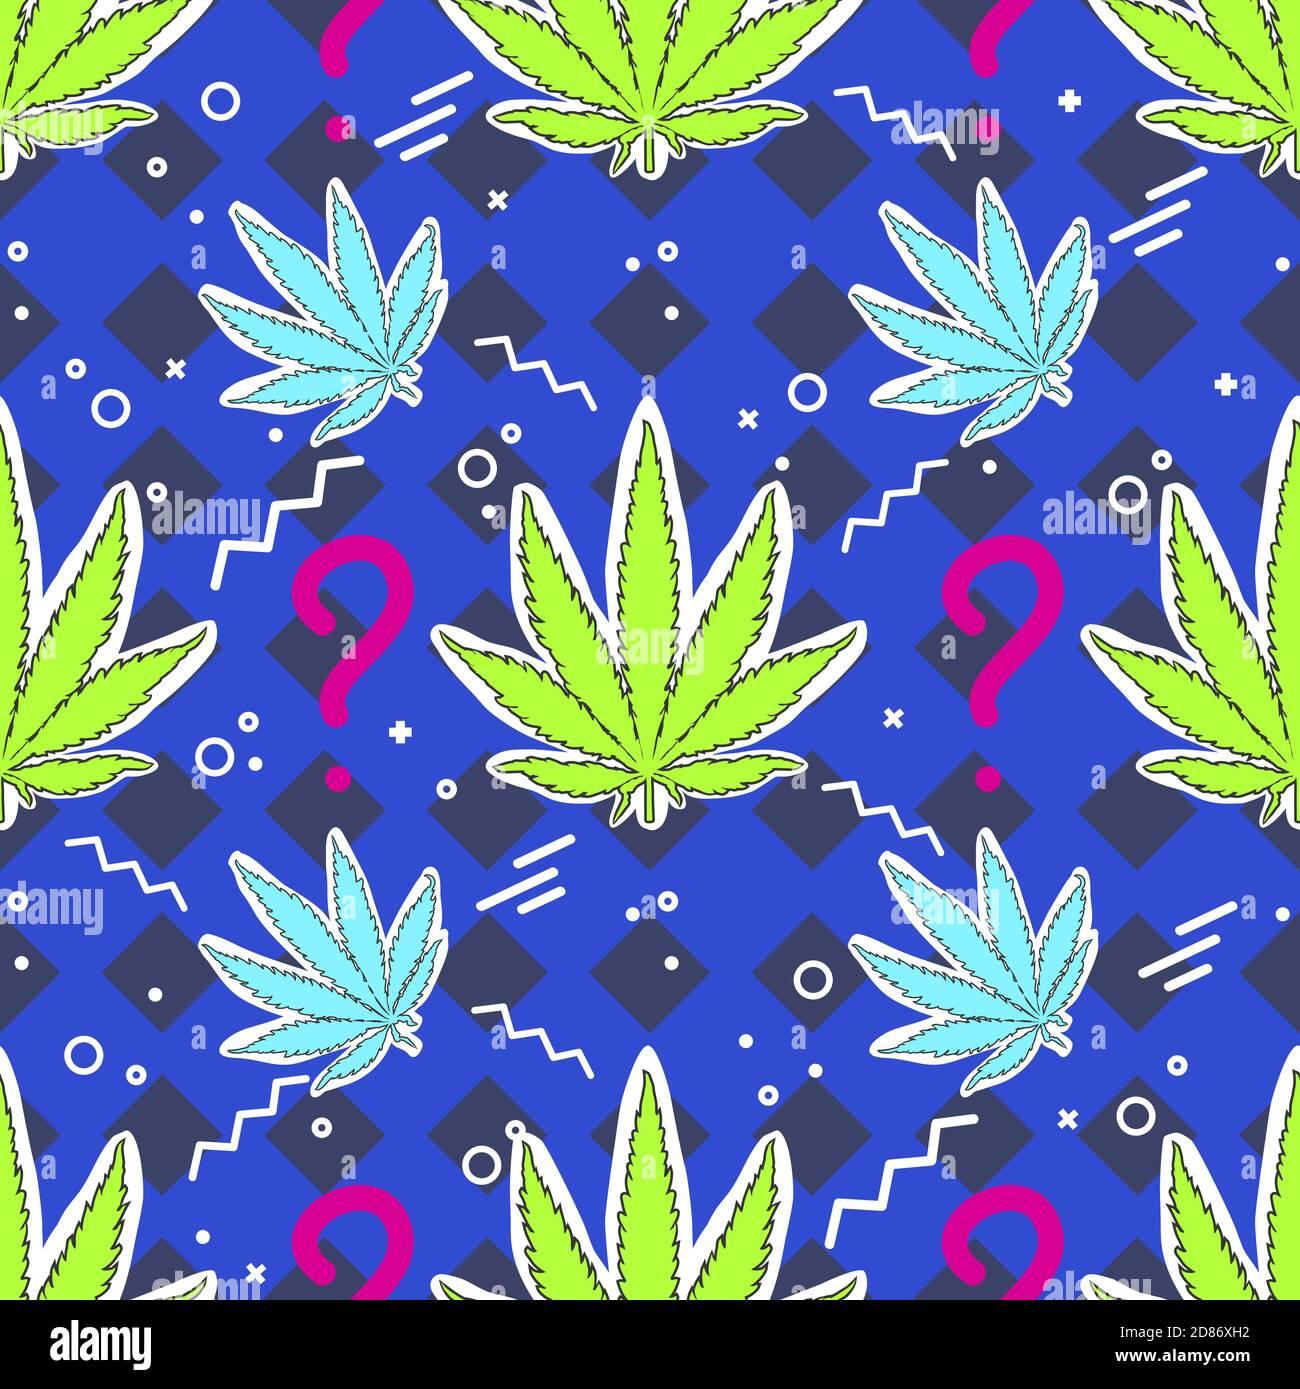 Seamless Pattern With Hemp Leaves Geometric Forms In The